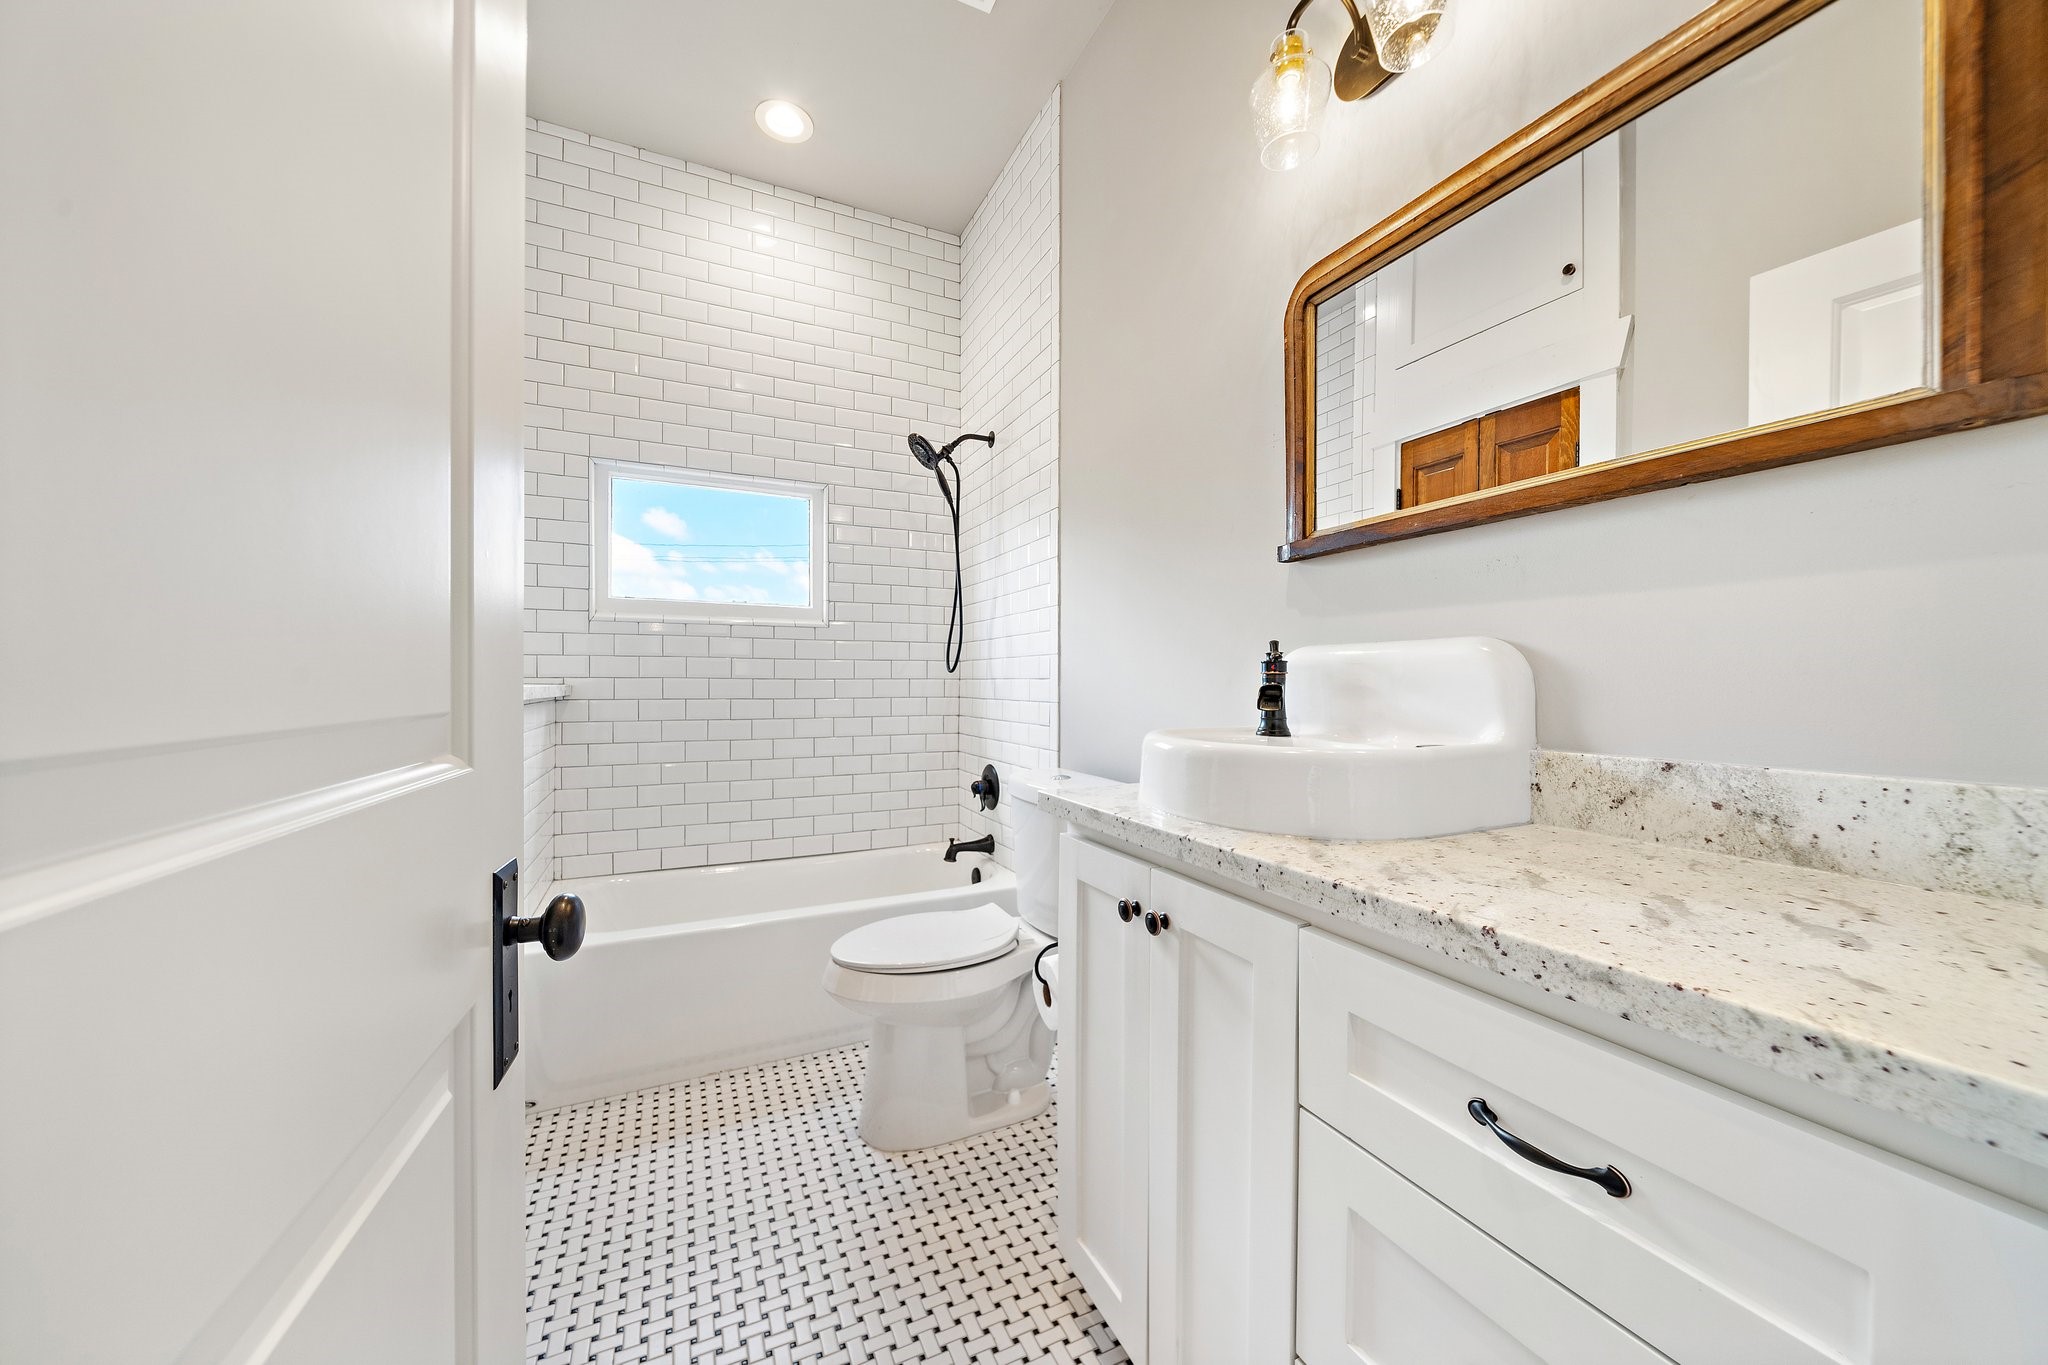 Guest bathroom - located between the 2 guest rooms, in true Craftsman style! Refinished antique sink and vintage mirror. Linen closet and custom cabinets up top! Storage is the name of the game at this house!